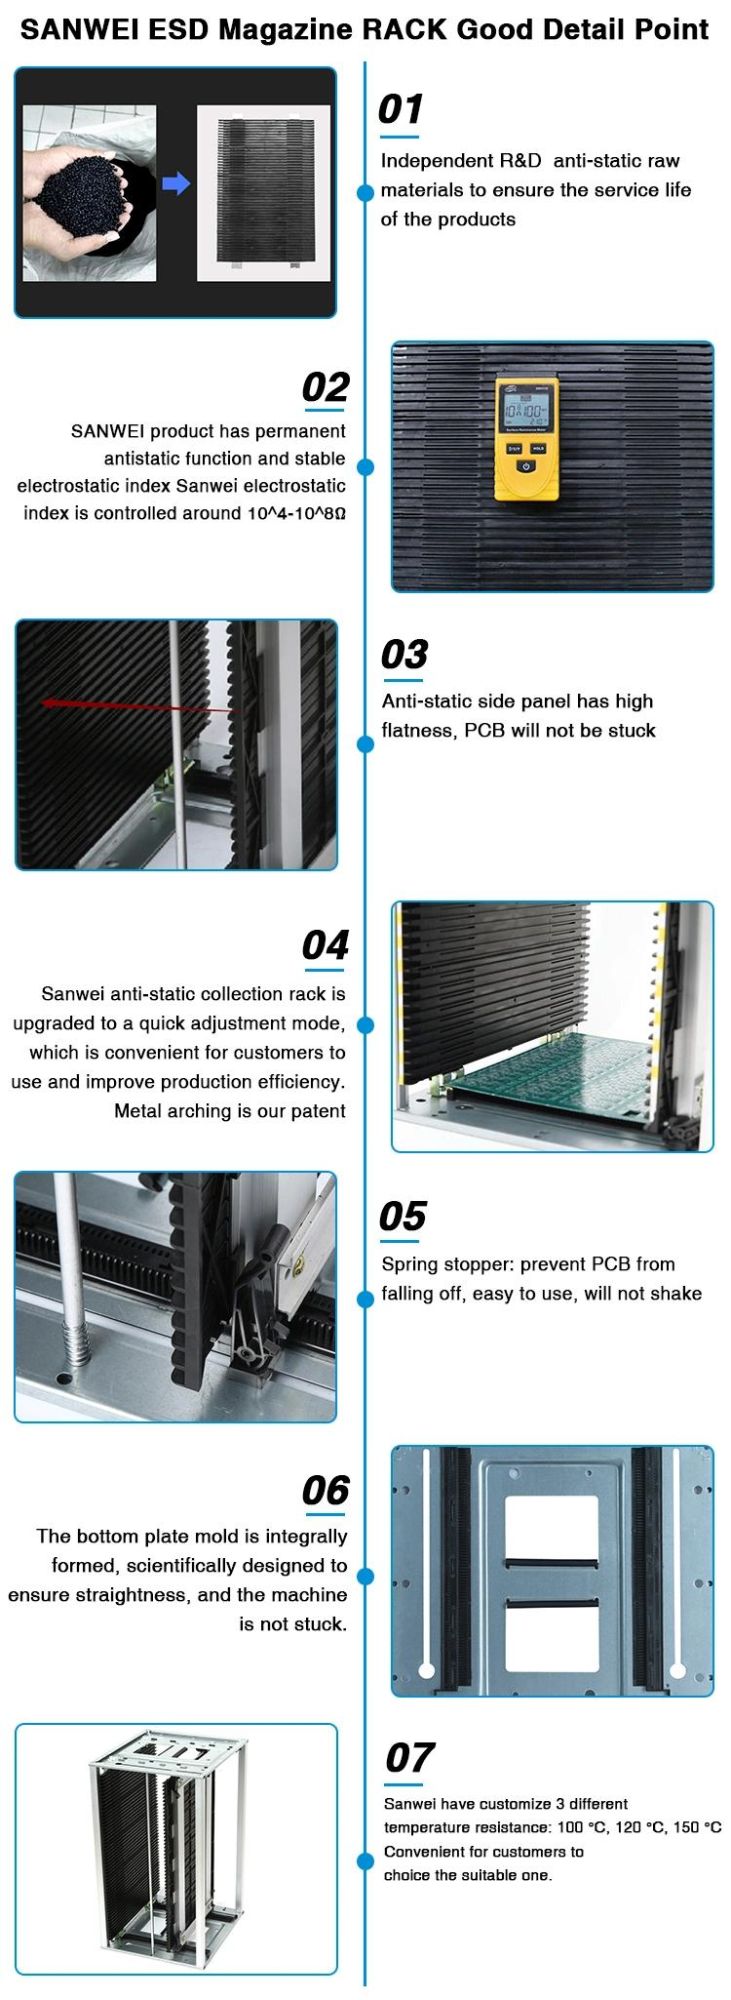 ESD Anti-Static SMT PCB Magazine Rack for The Manufacture